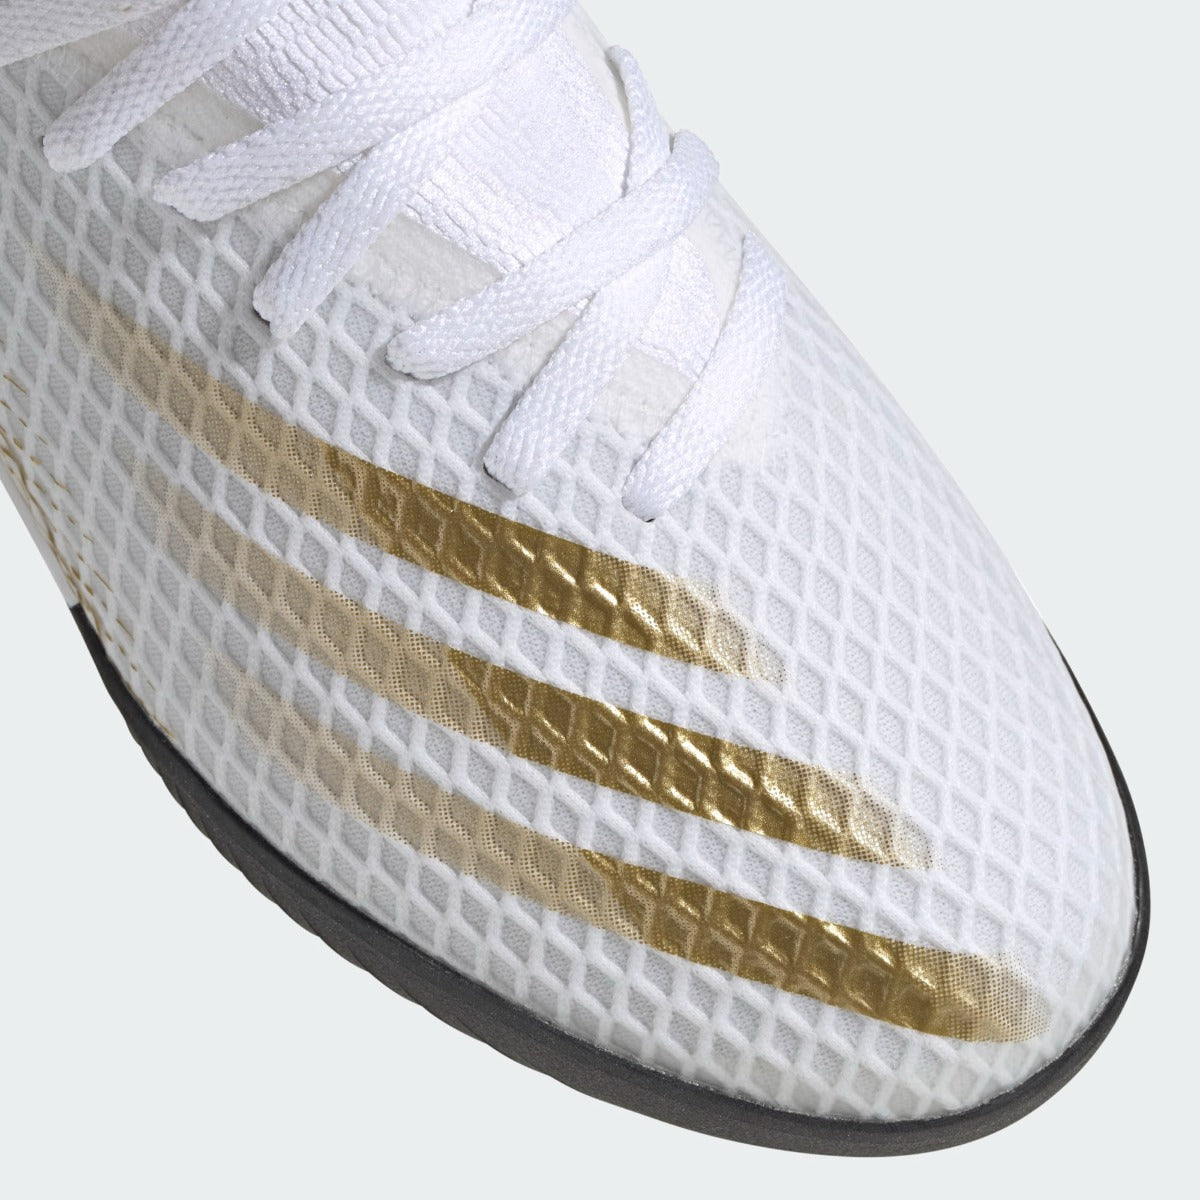 Adidas JR X Ghosted.3 TF - White-Gold